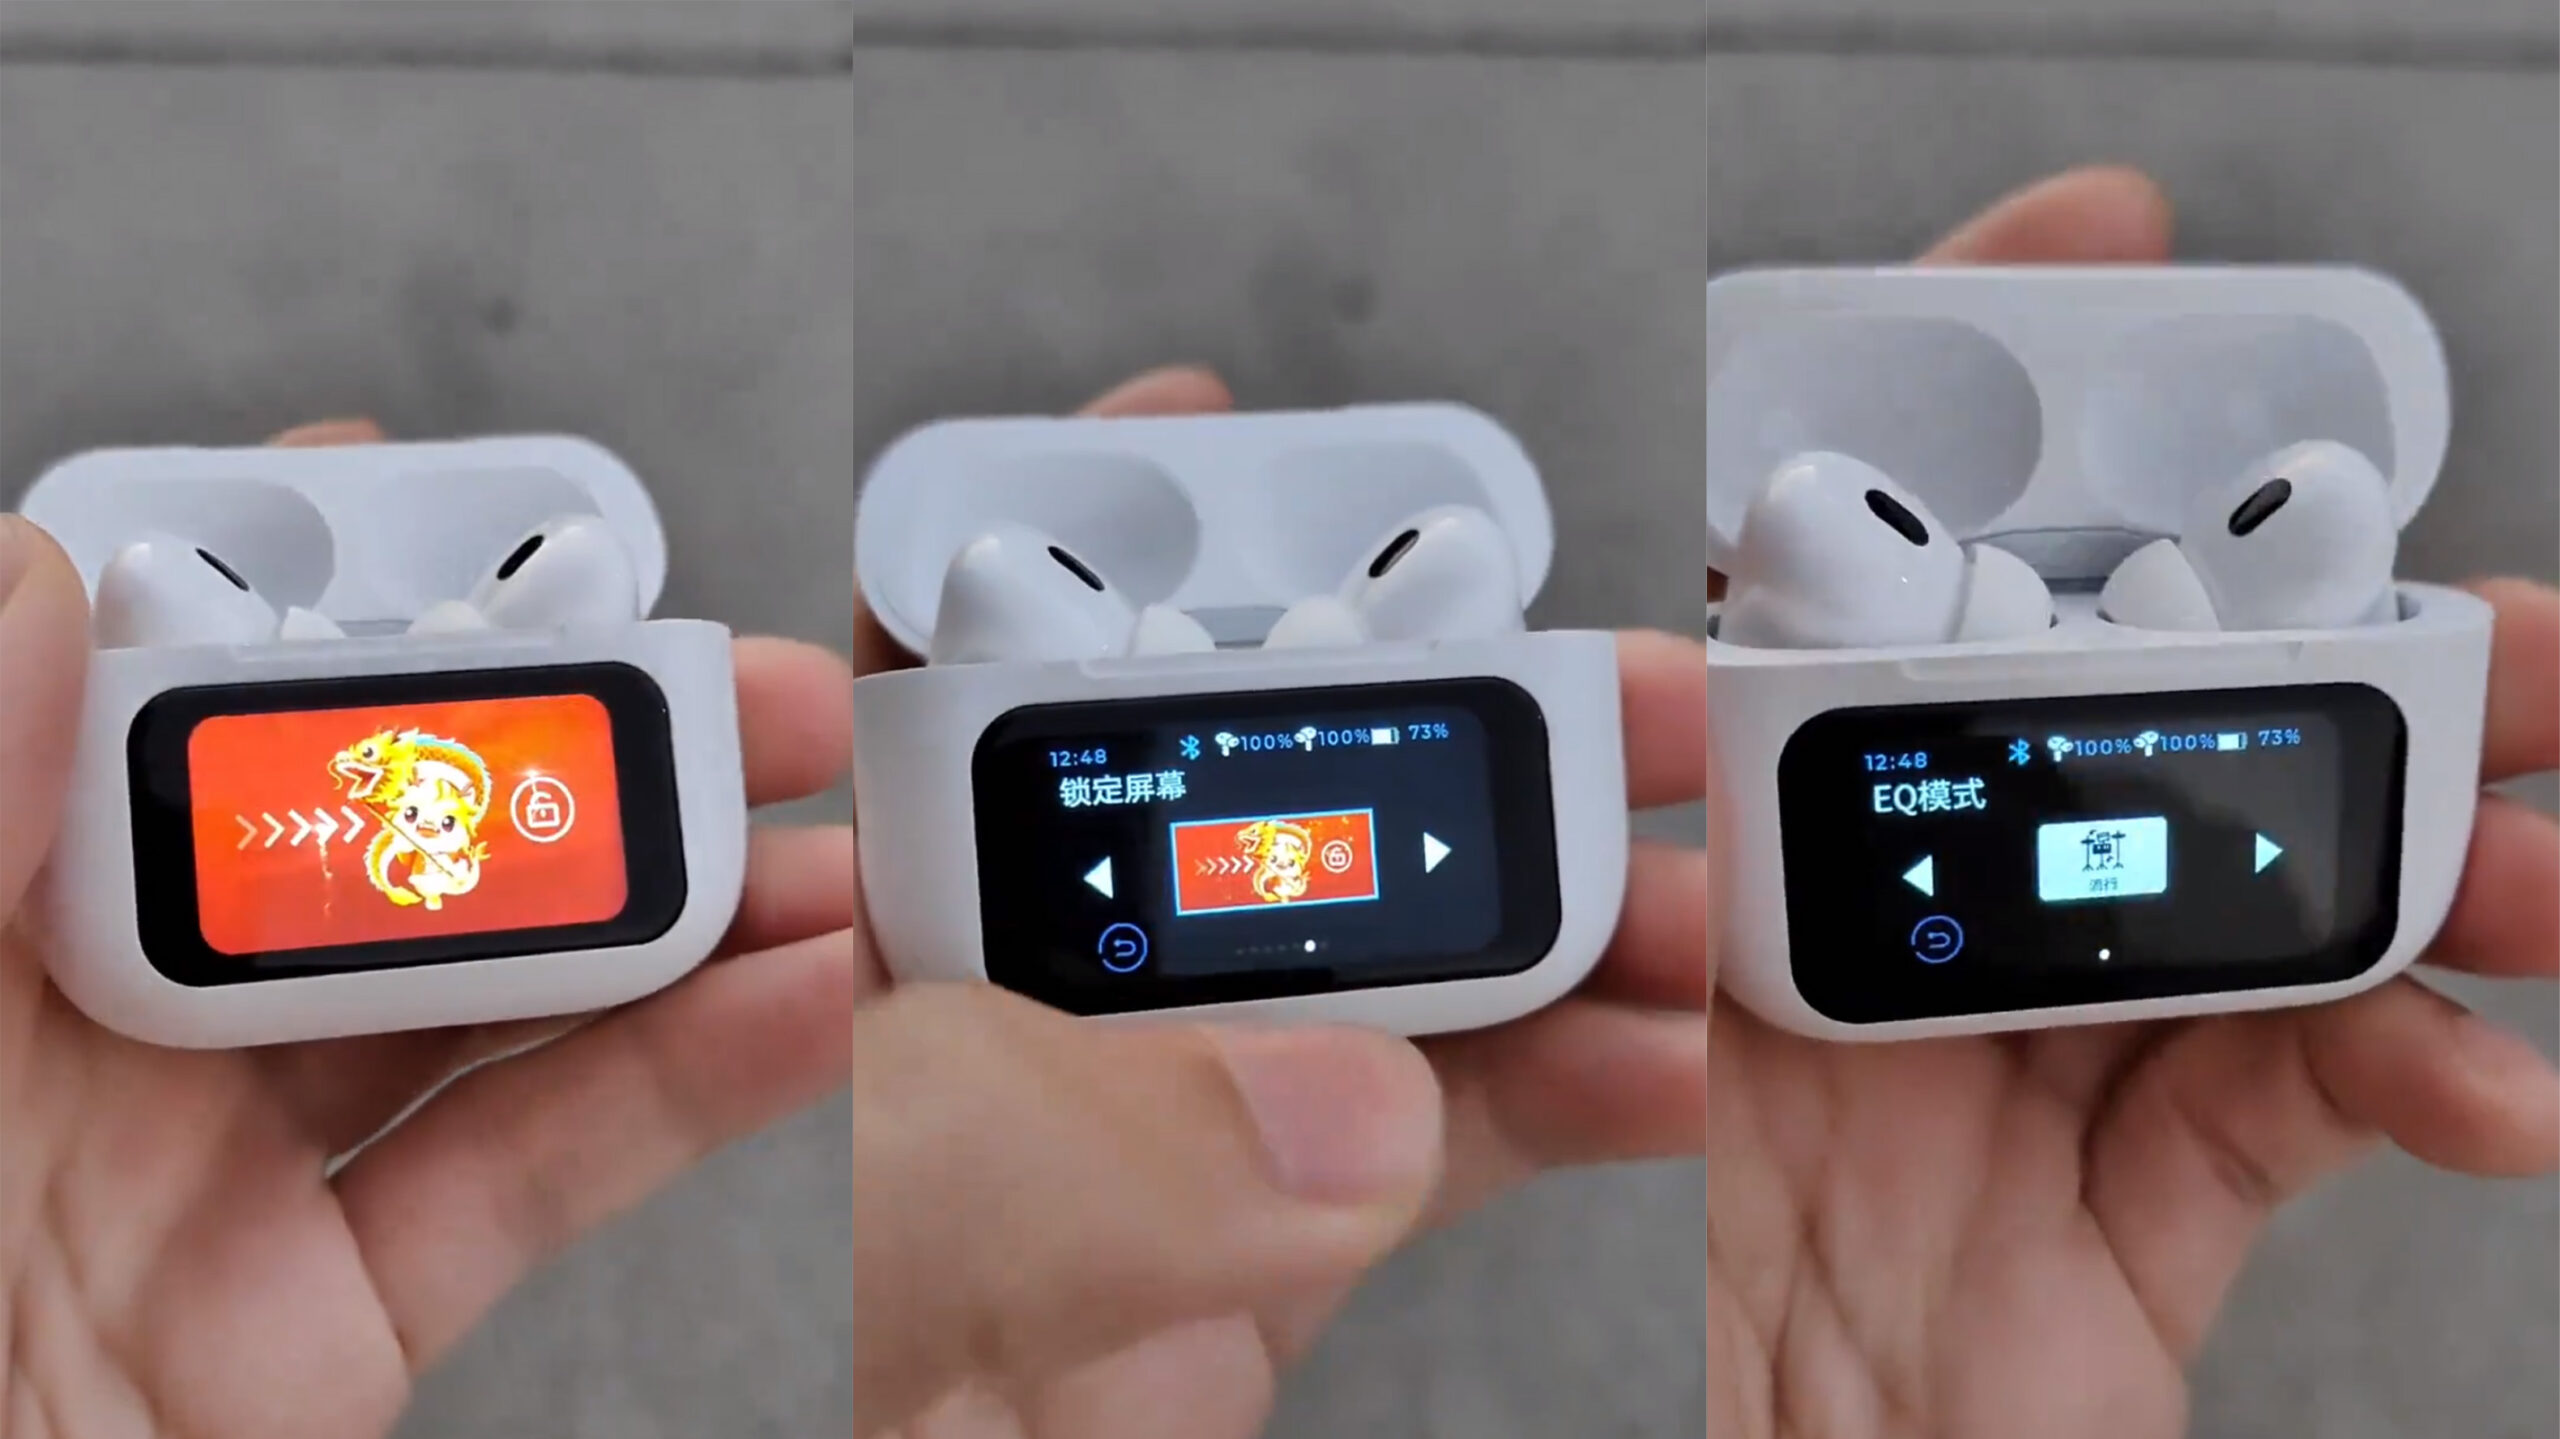 Counterfeit AirPods with a screen.